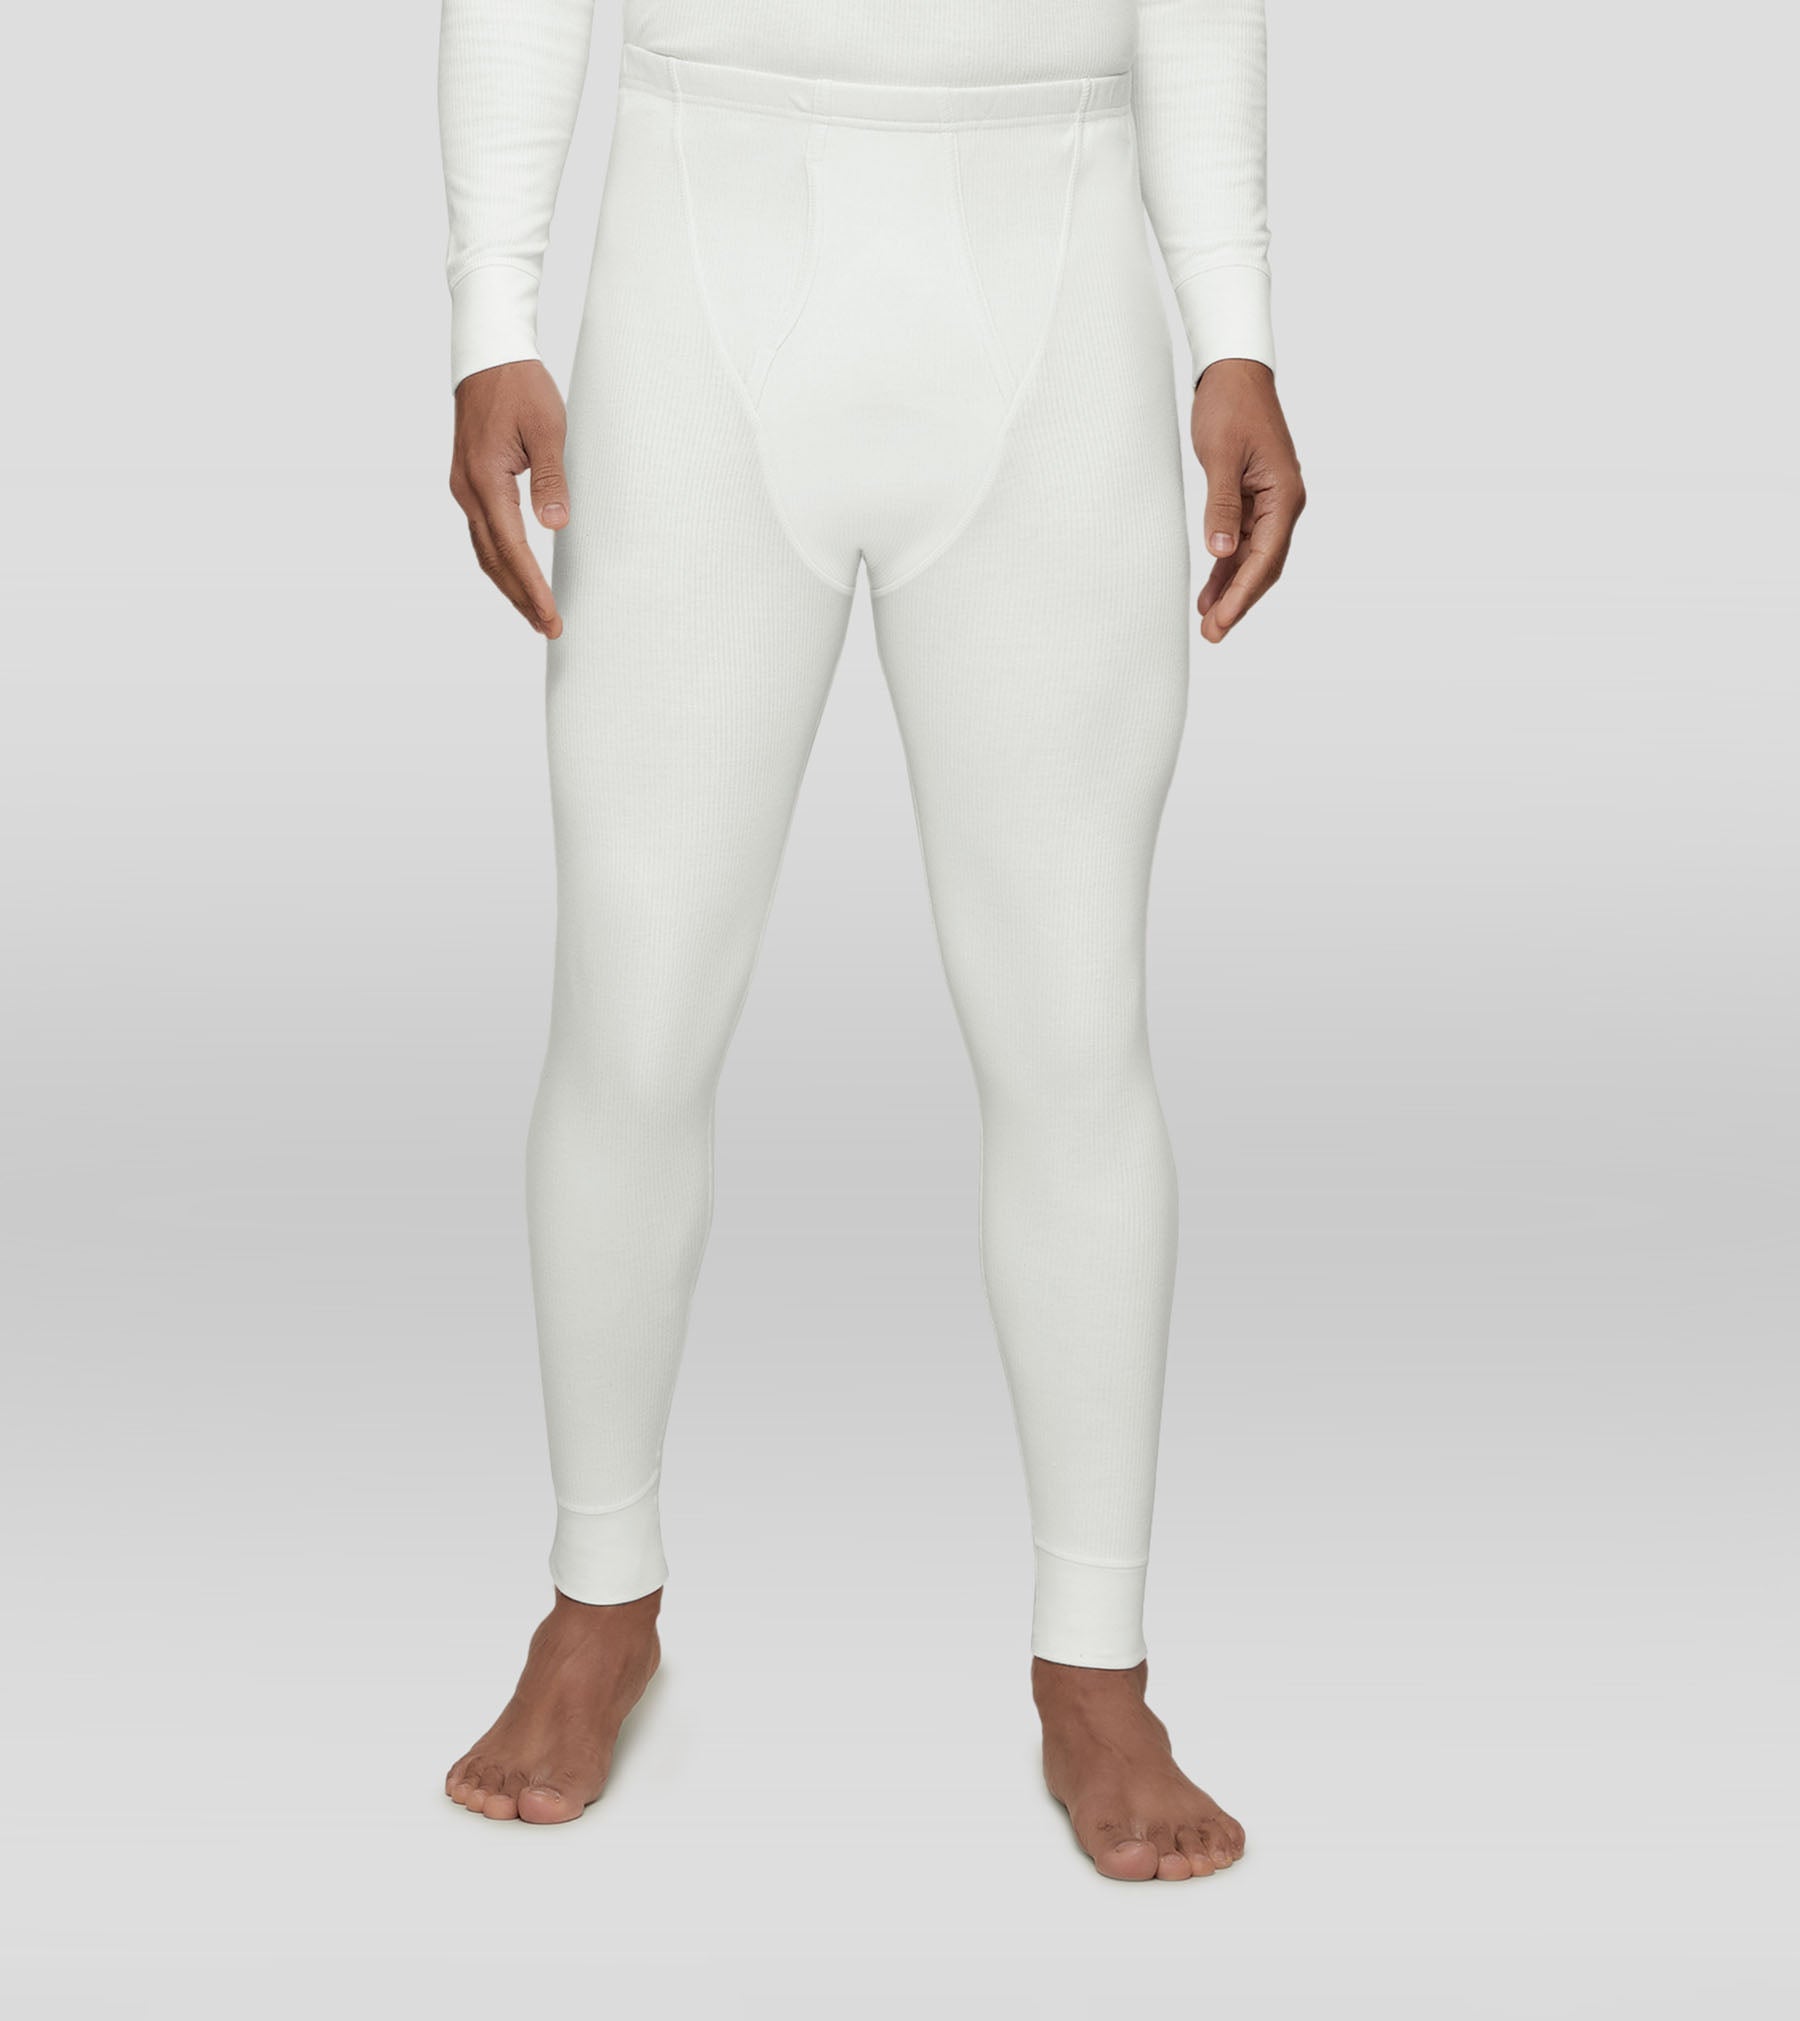 Long Johns - Buy Men's Long Johns Thermal Online in India – XYXX